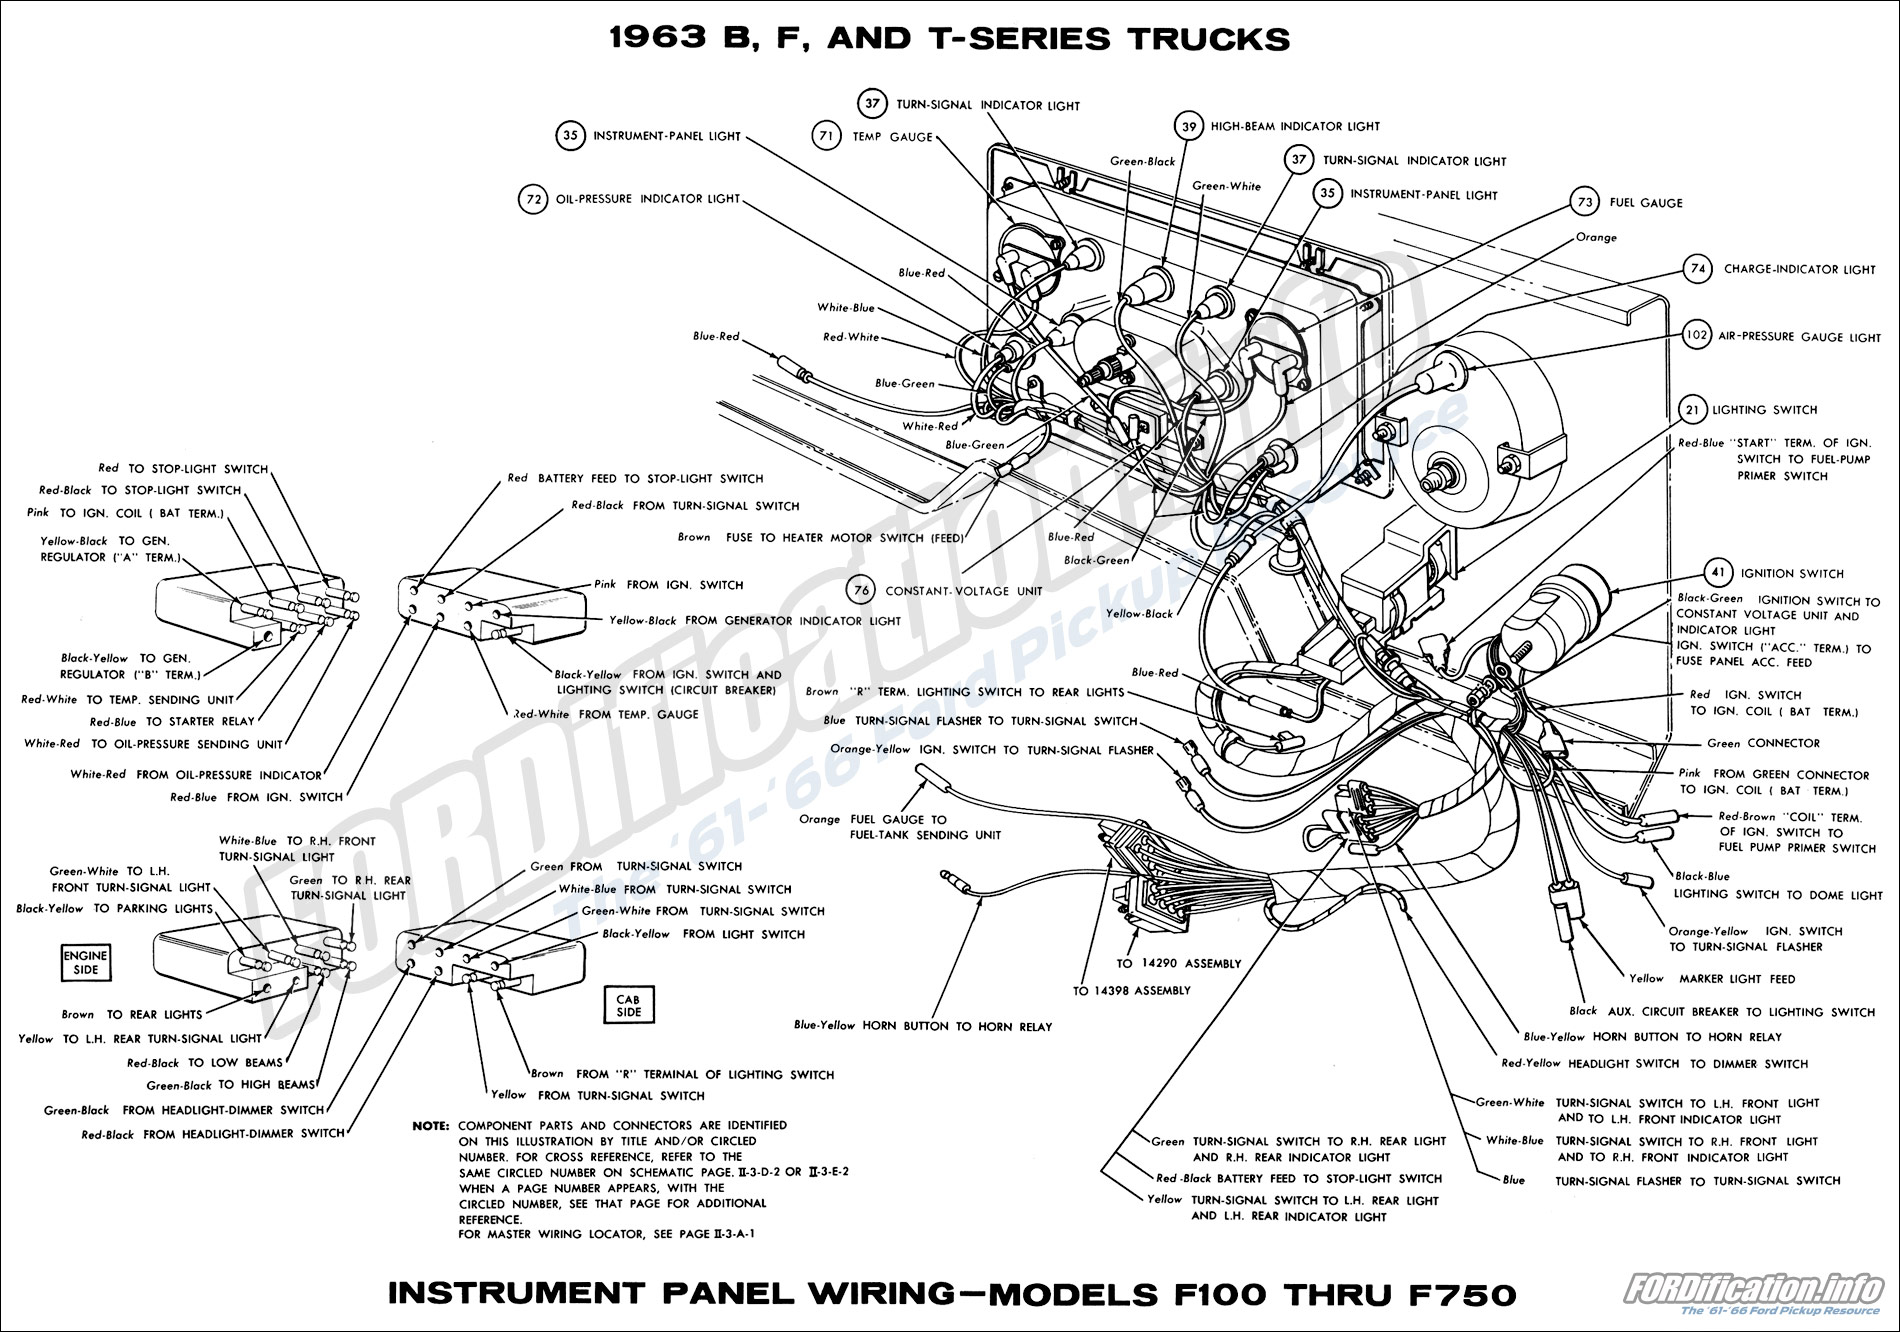 1965 Ford F100 Ignition Switch Wiring Diagram from fordification.info